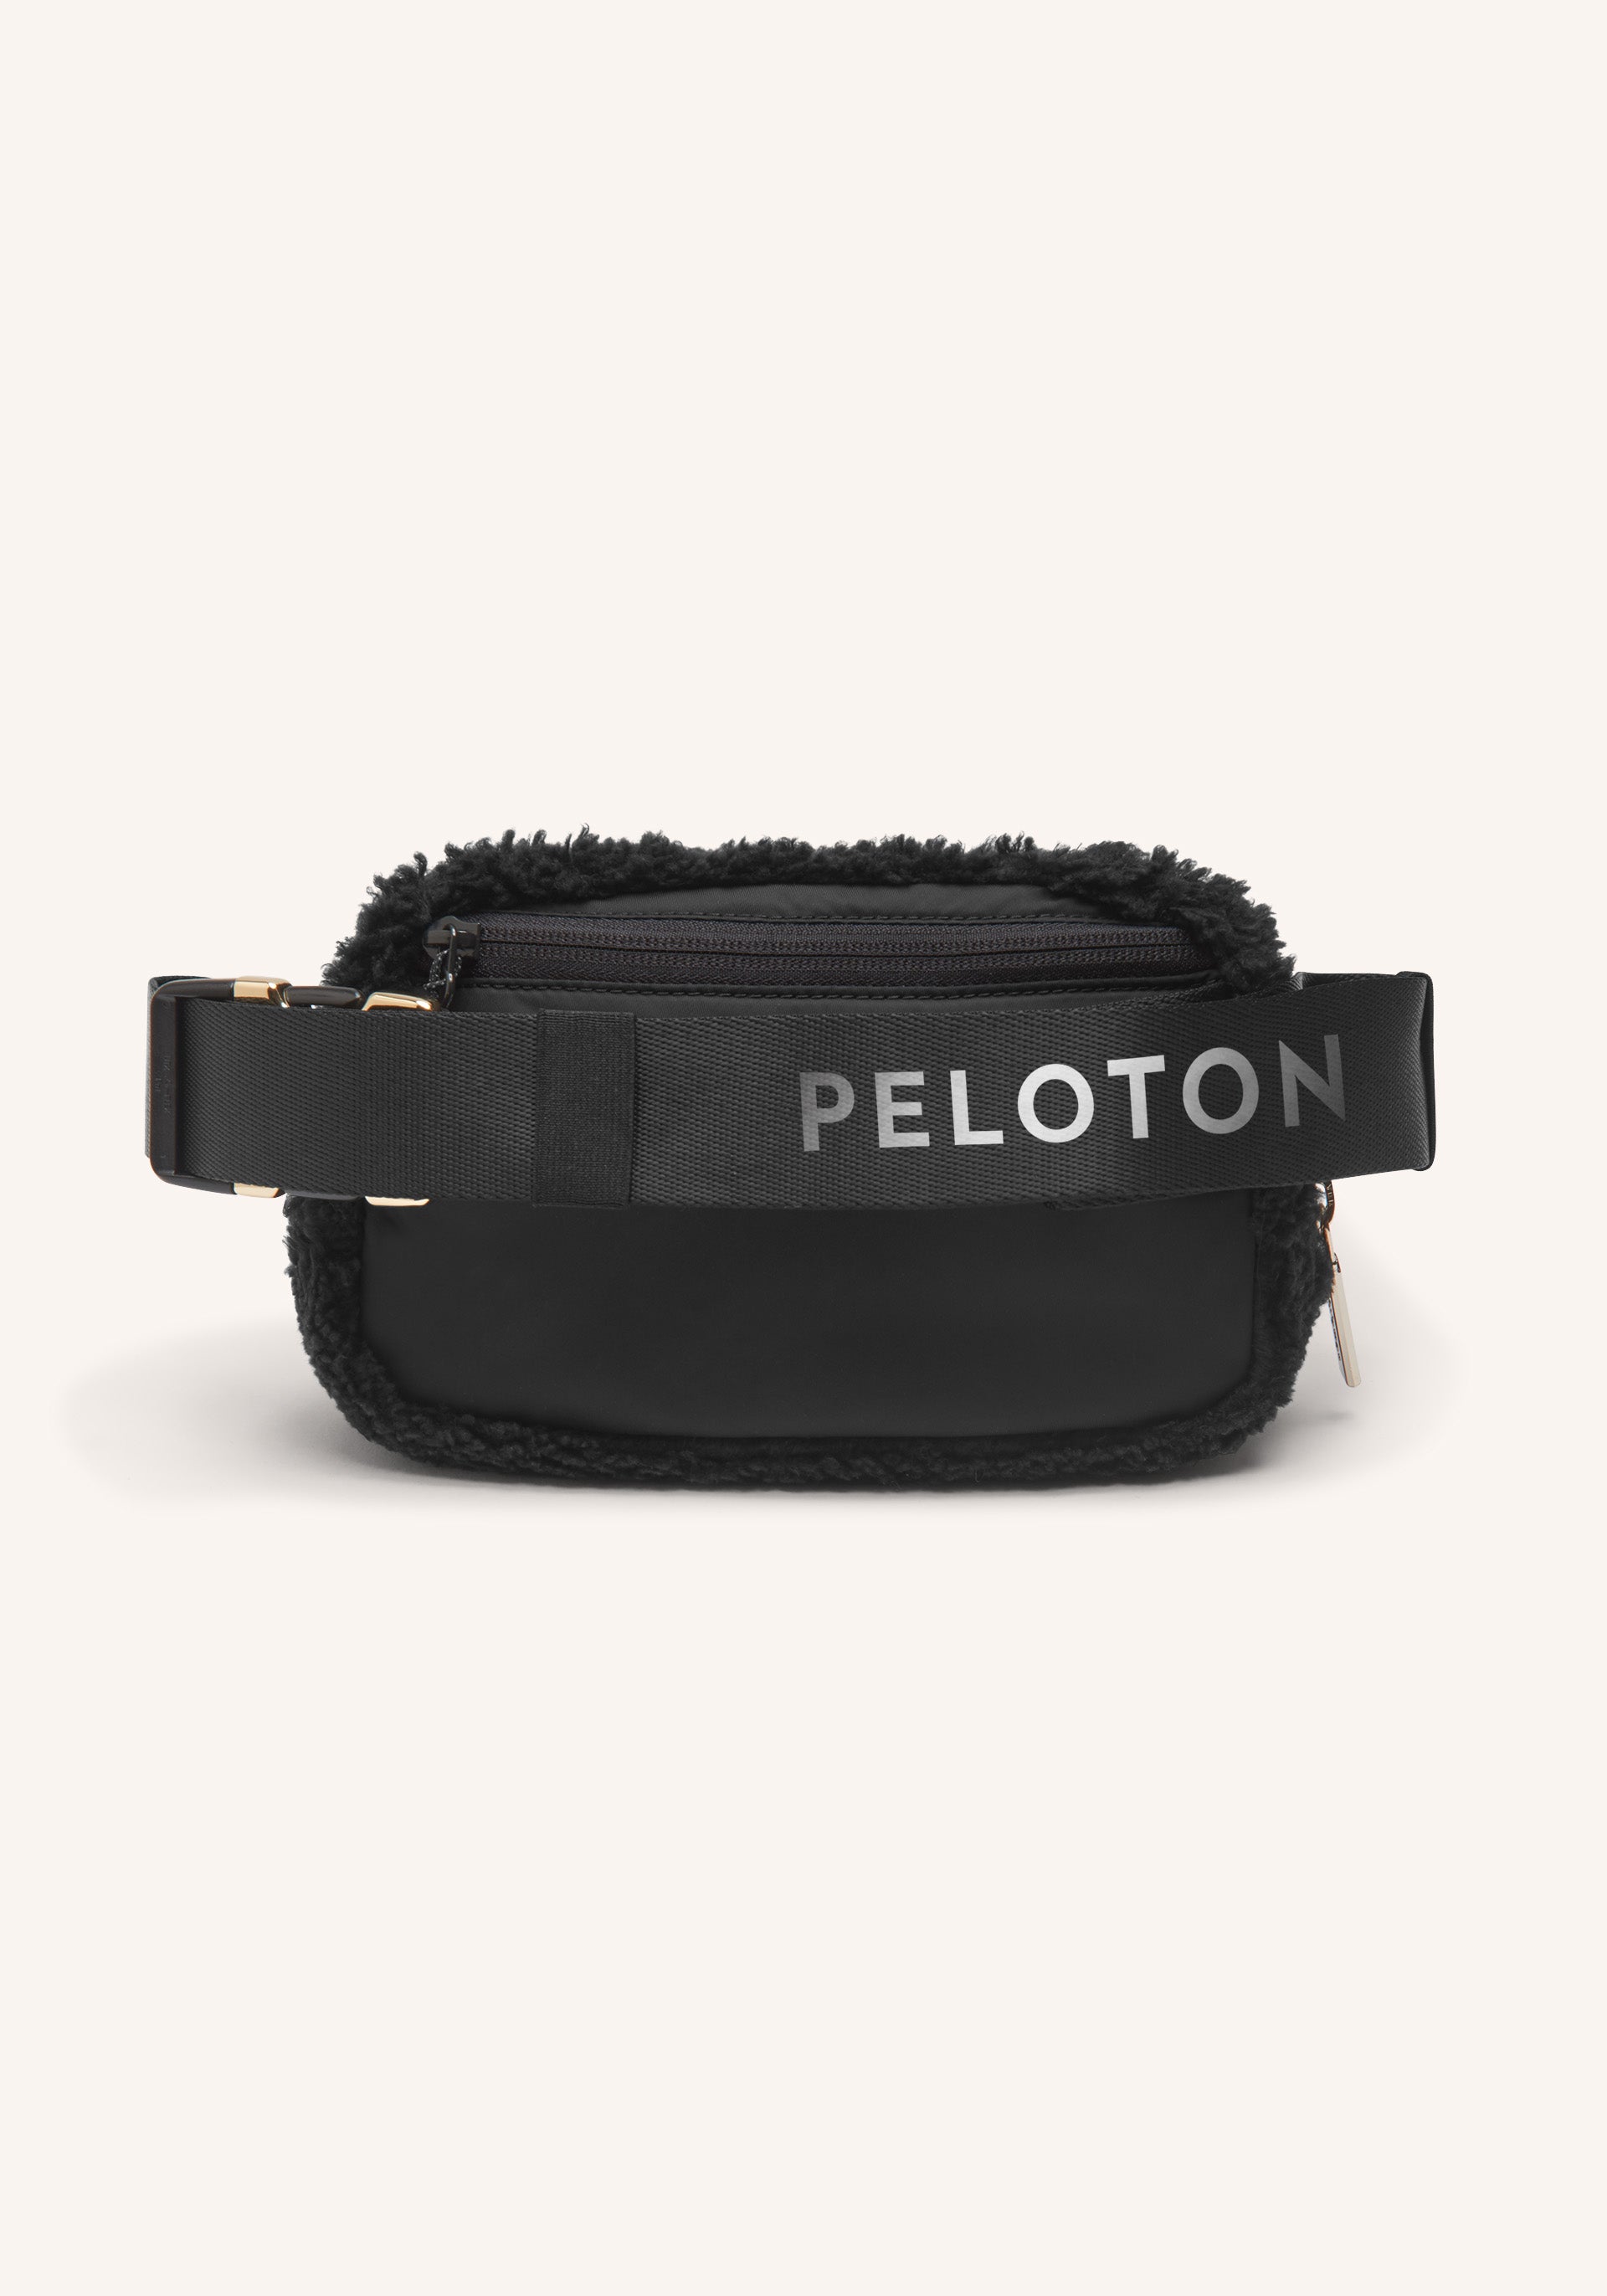 Peloton Belt Bag Fanny Pack Great Orange theory Fitness or spin